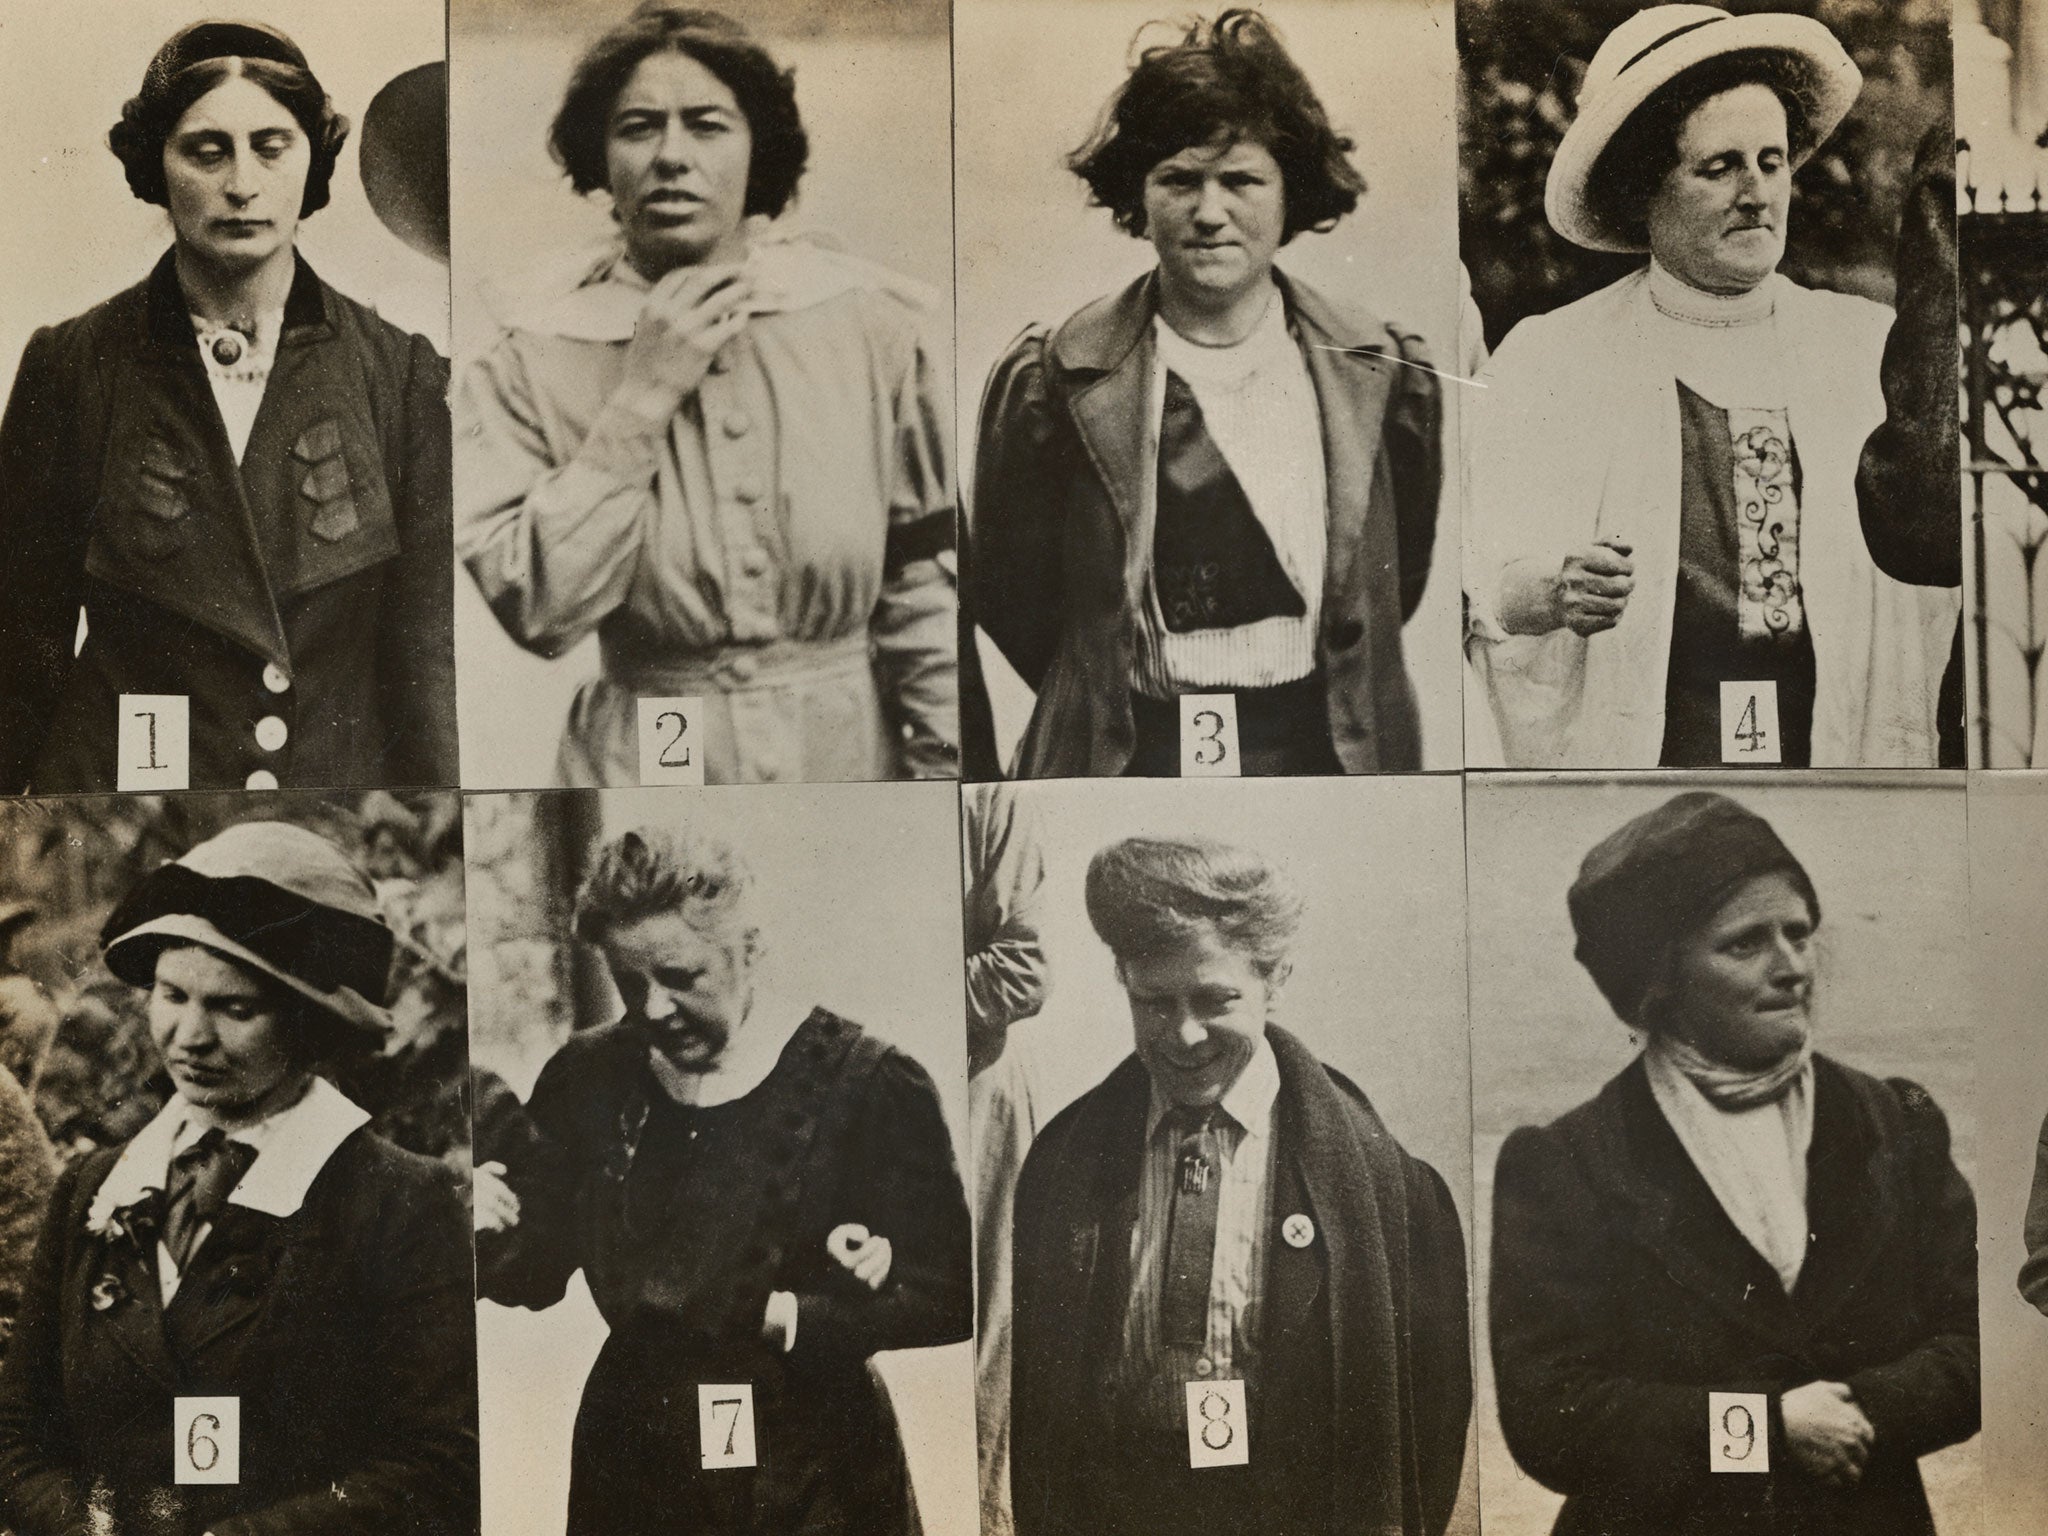 Women on the edge: 'Surveillance Photograph of Militant Suffragettes' by Criminal Record Office from Simon Schama's 'The Face of Britain'